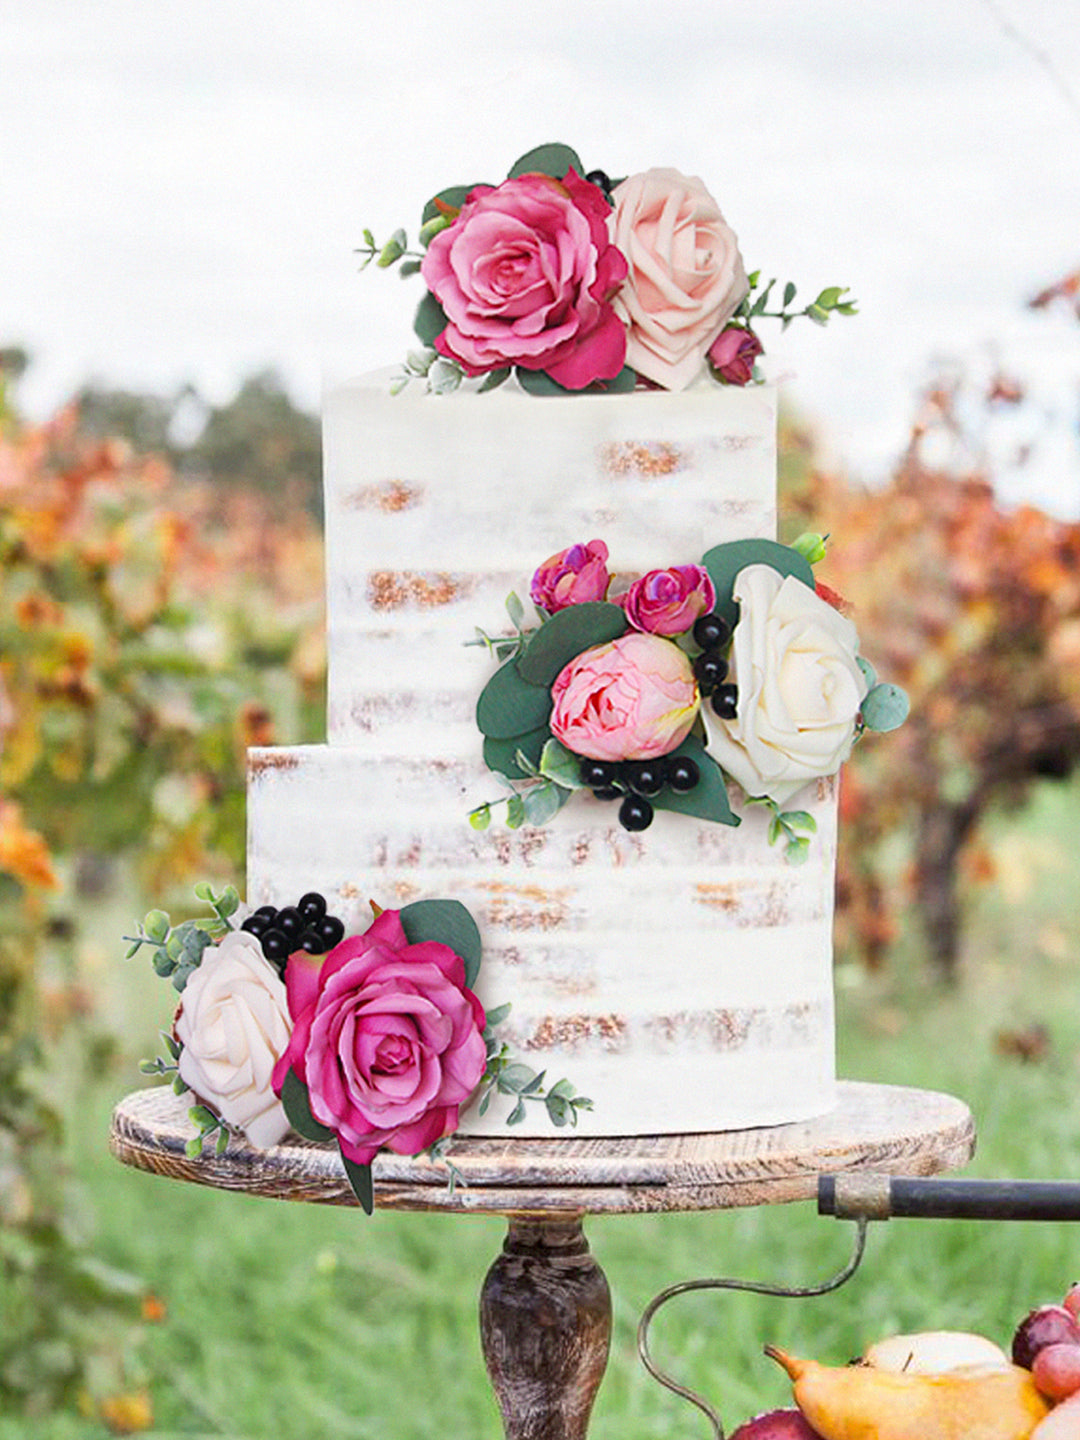 How to Choose a Cake Topper That Reflects Your Personal Love Story?